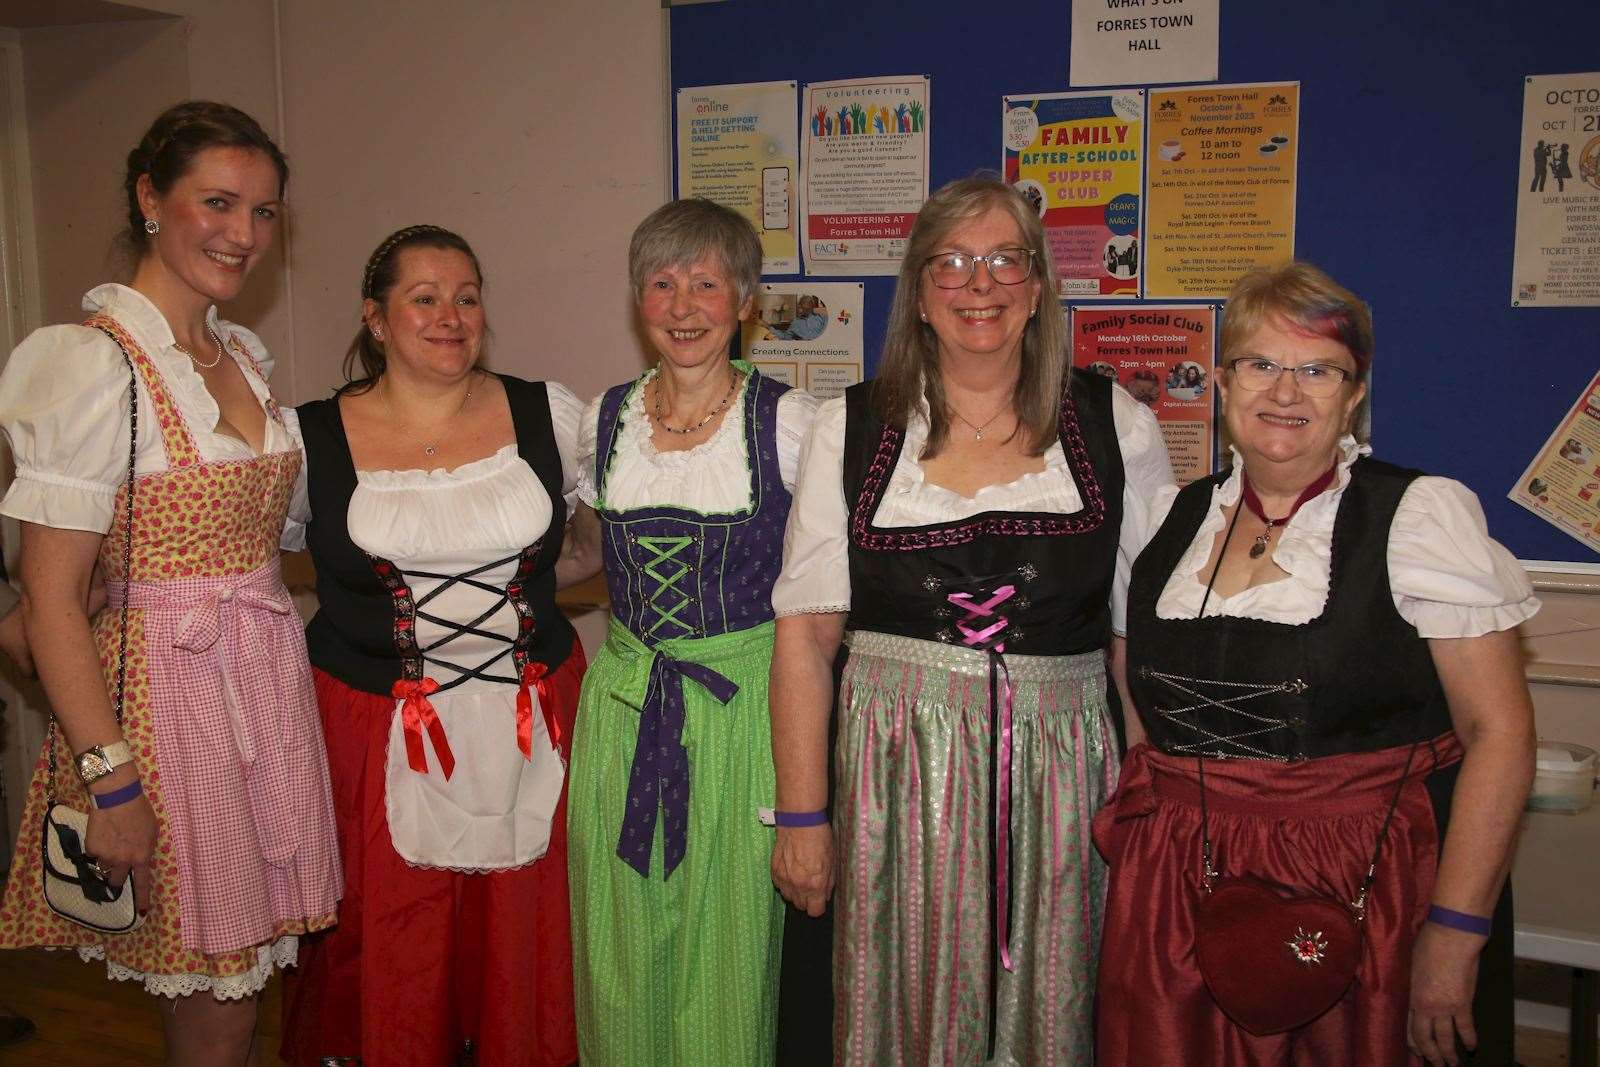 Five little maids are we! Alice, Jennifer, Gisela, Alison and Eileen - 40 per cent of them authentic Germans.